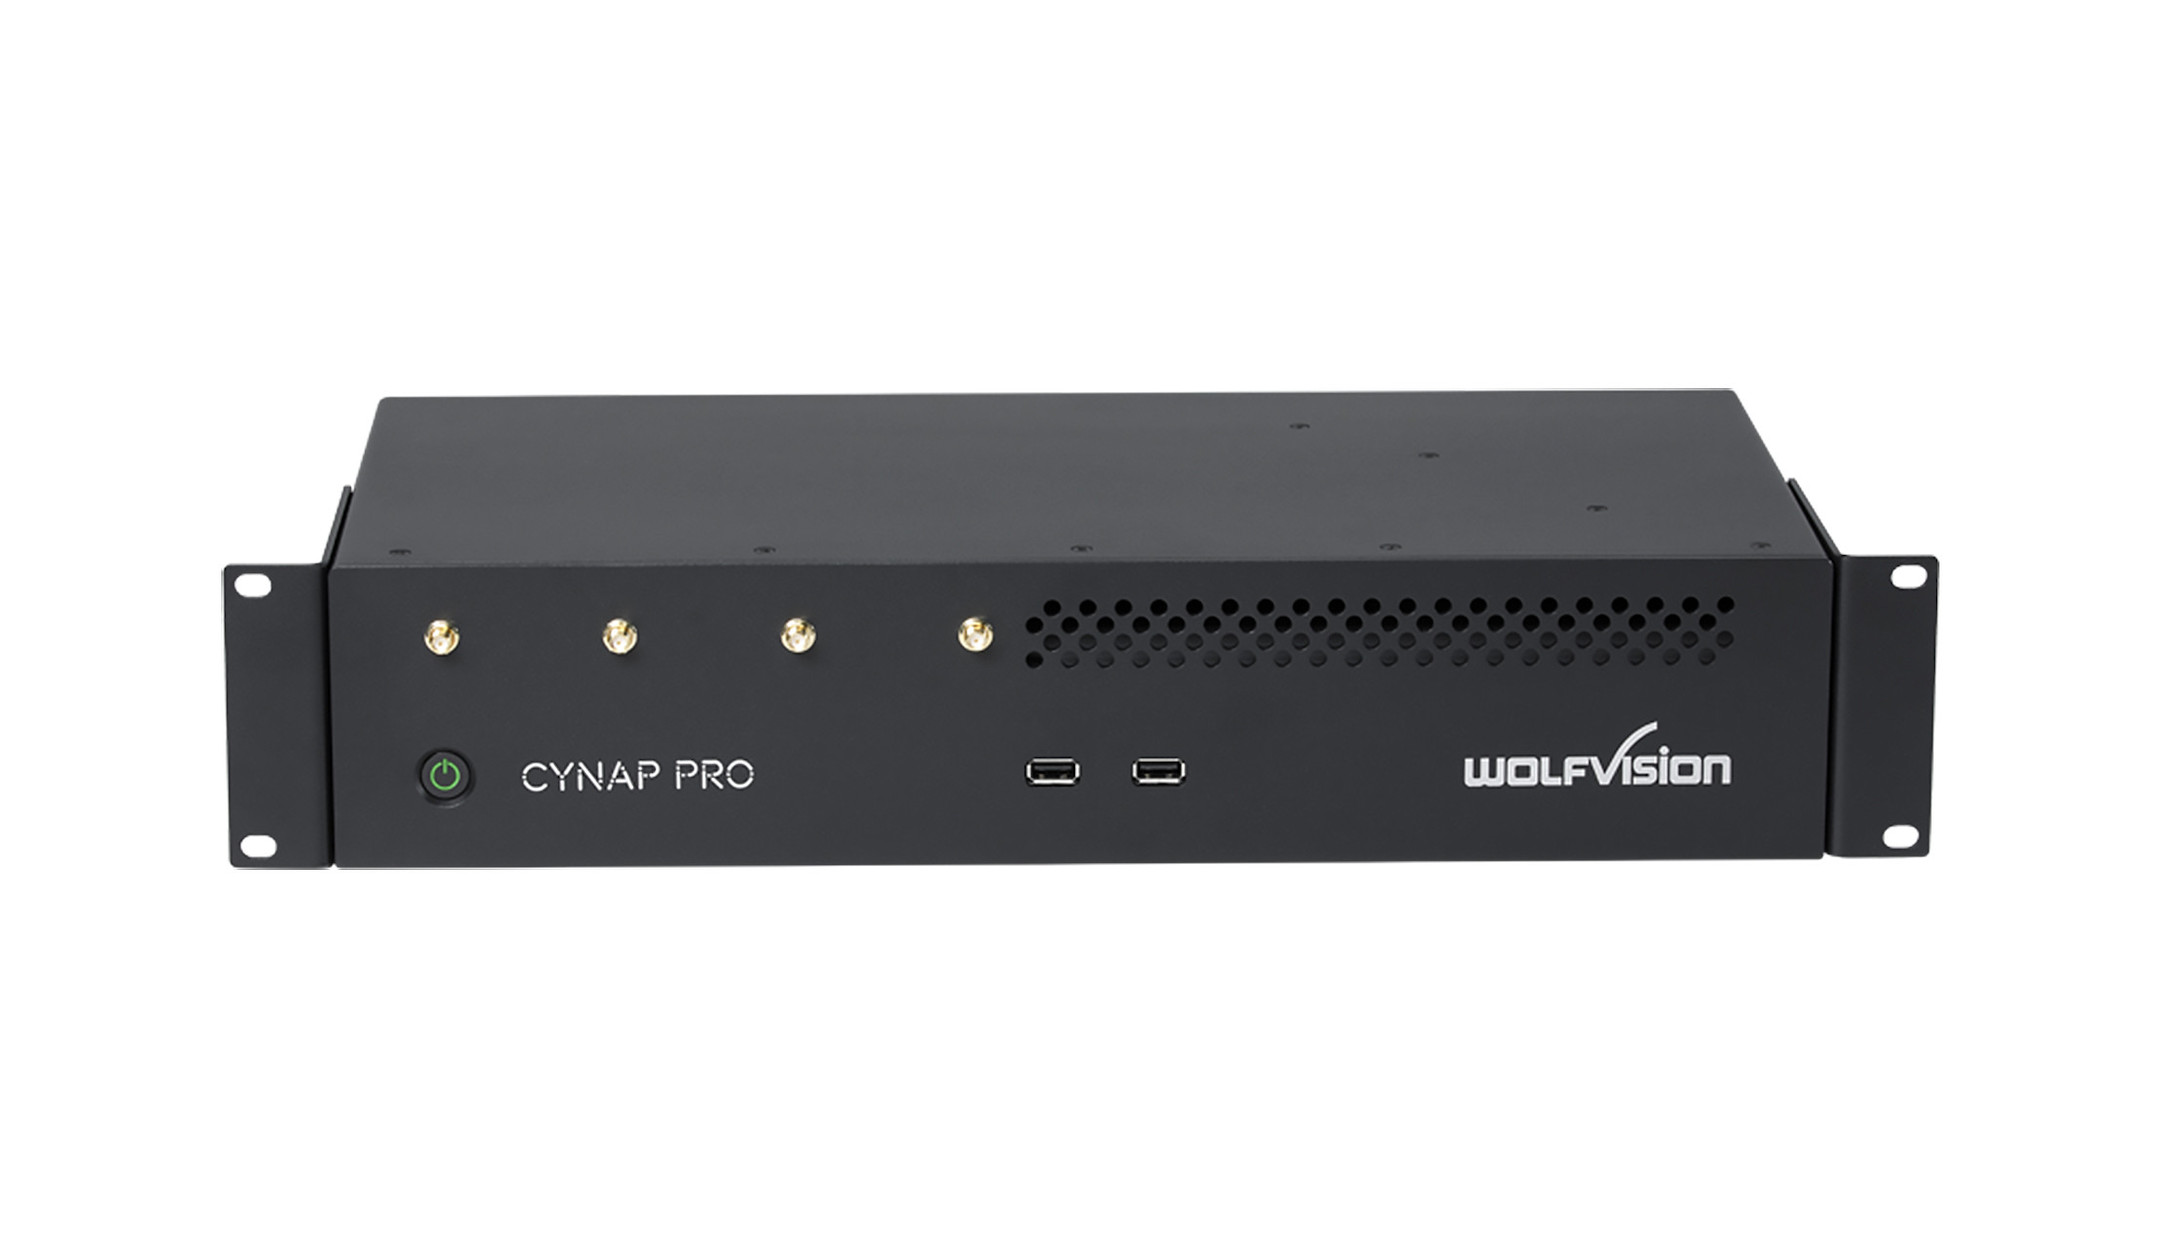 Wolfvision-Cynap-Pro-HDMI-HDBaseT-IN-OUT-Version-D-drahtloses-All-in-One-Prasentationssystem